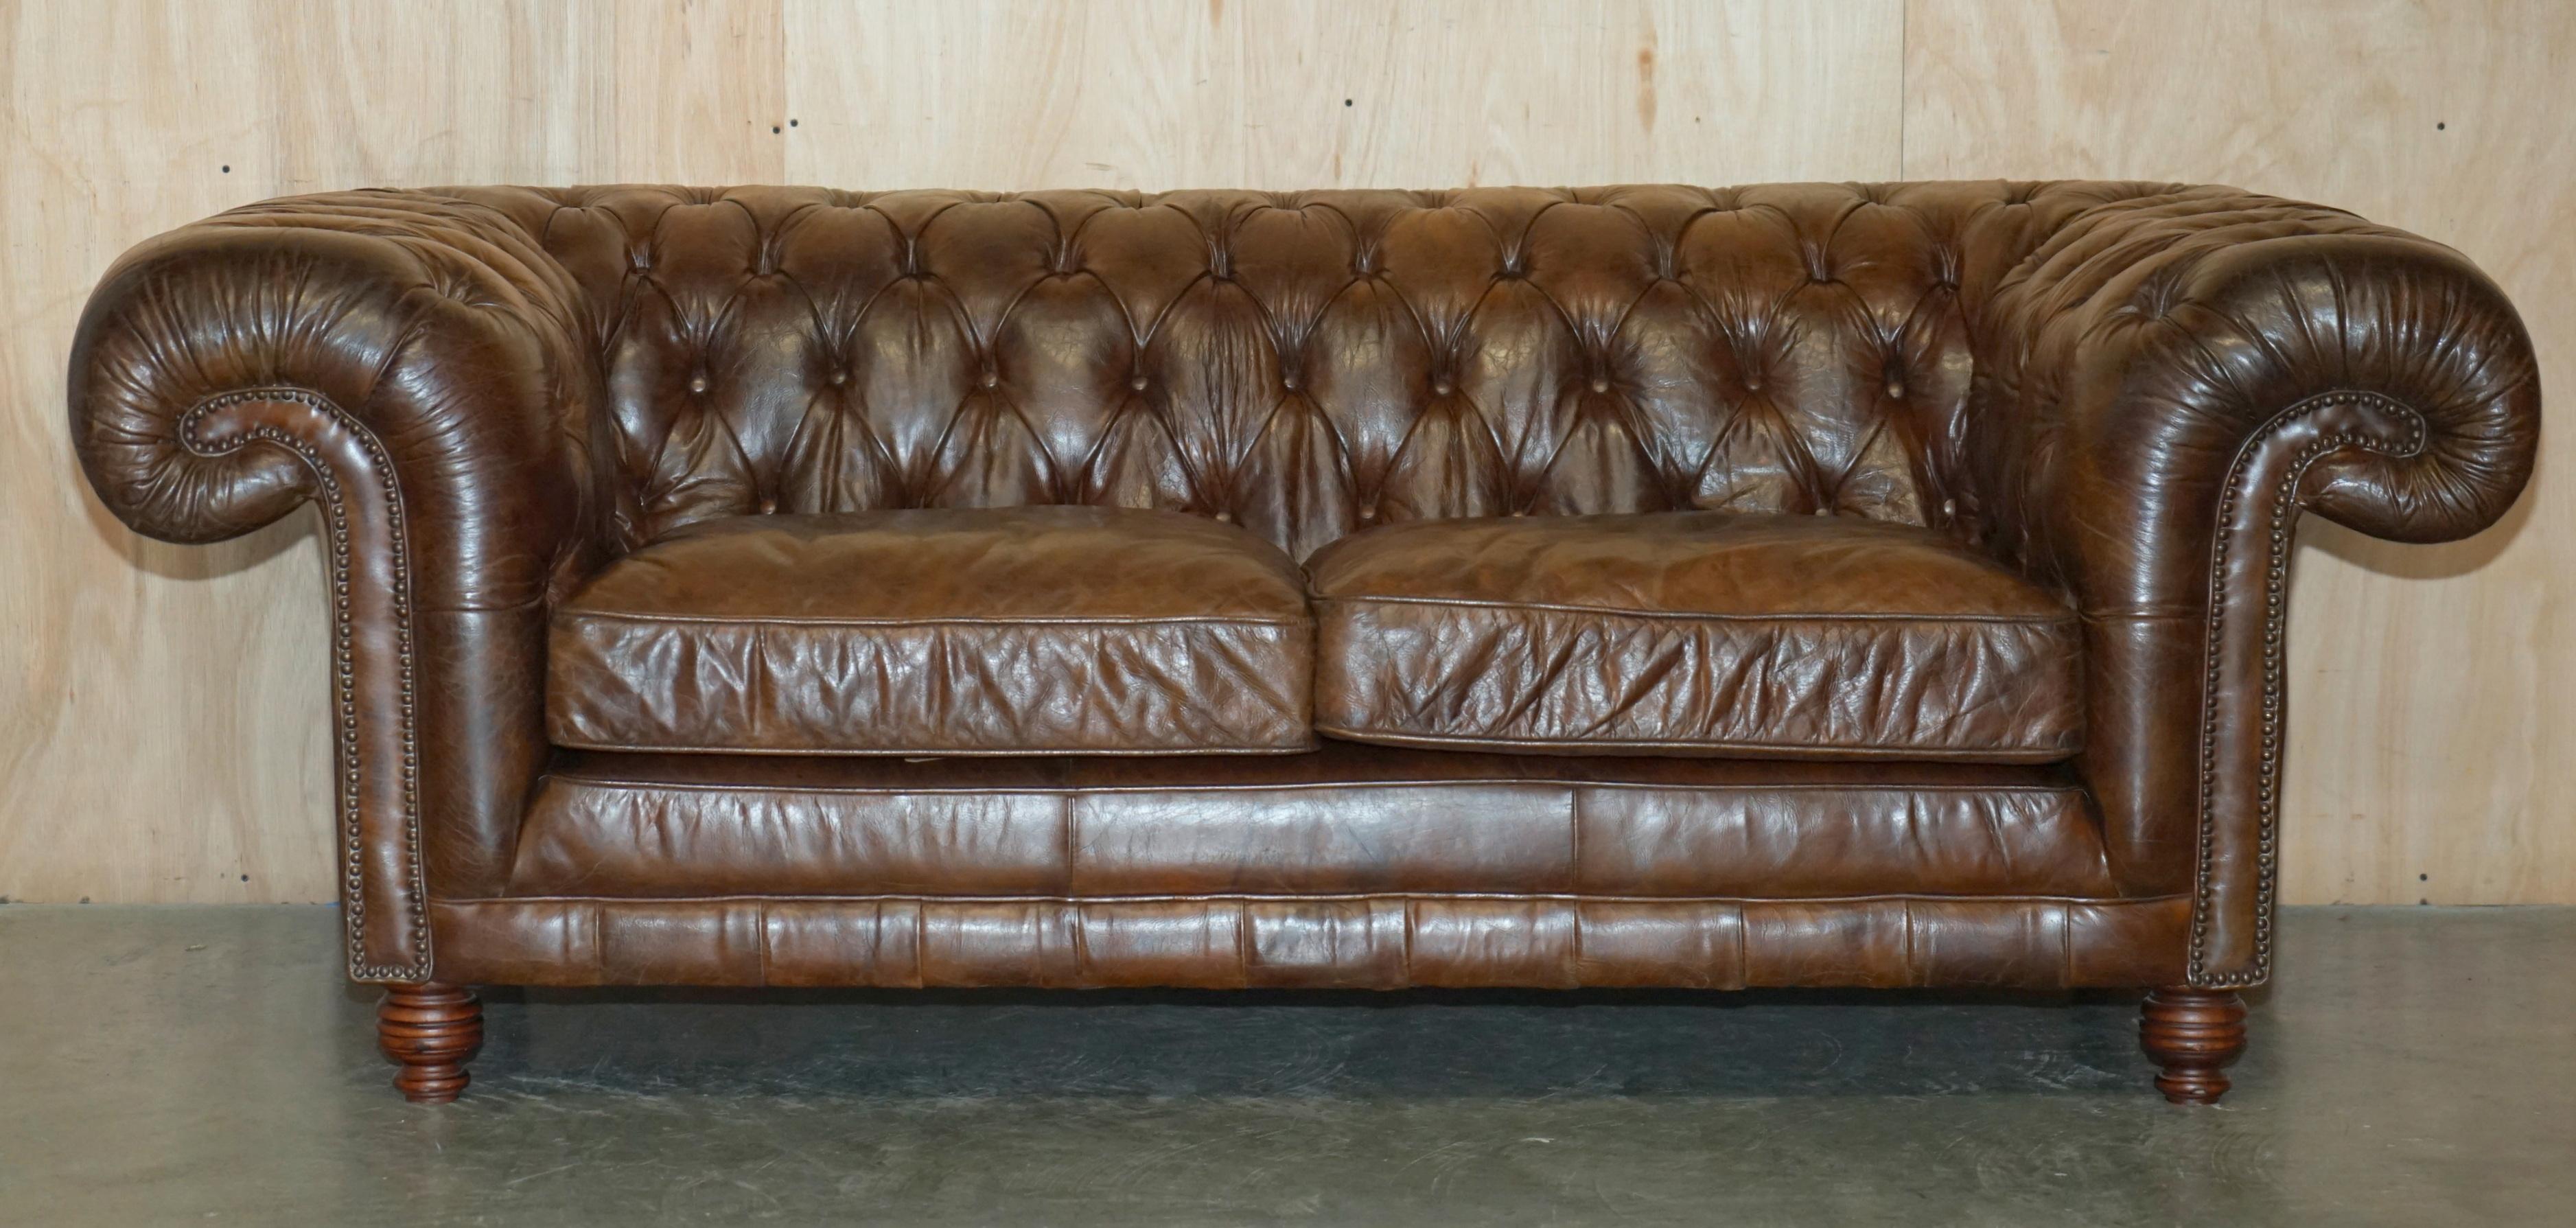 1 OF 2 TIMOTHY OULTON HERiTAGE BROWN VINTAGE LEATHER CHESTERFIELD HALO SOFAS For Sale 14